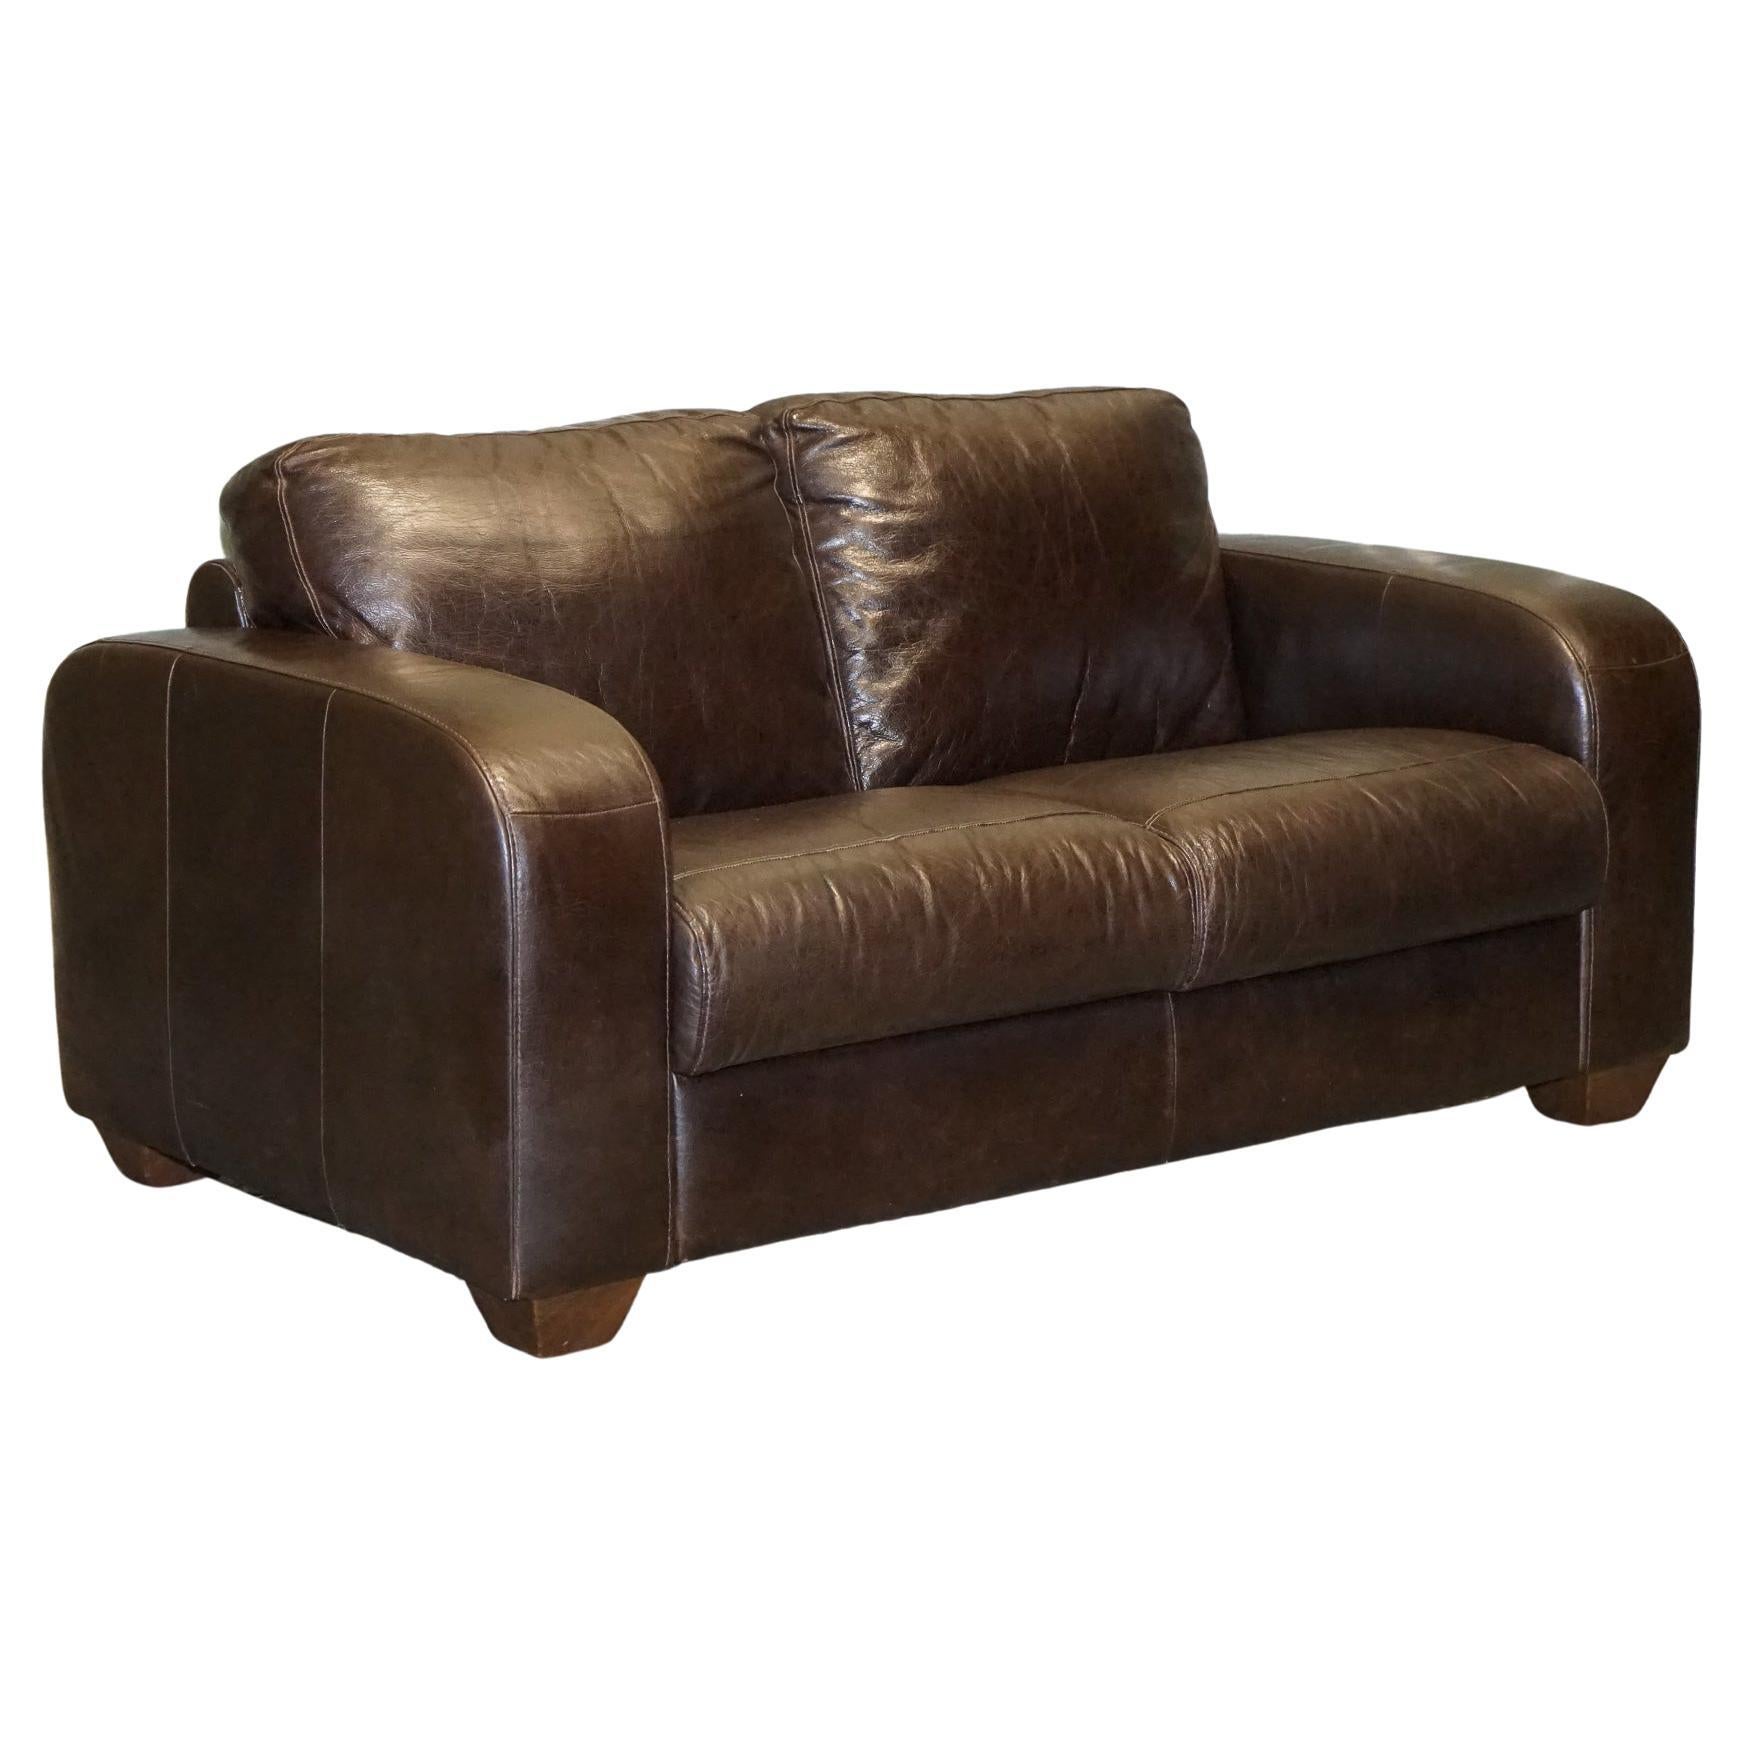 Vintage Chocolate Brown Leather Two Seater Sofa by Sofitalia